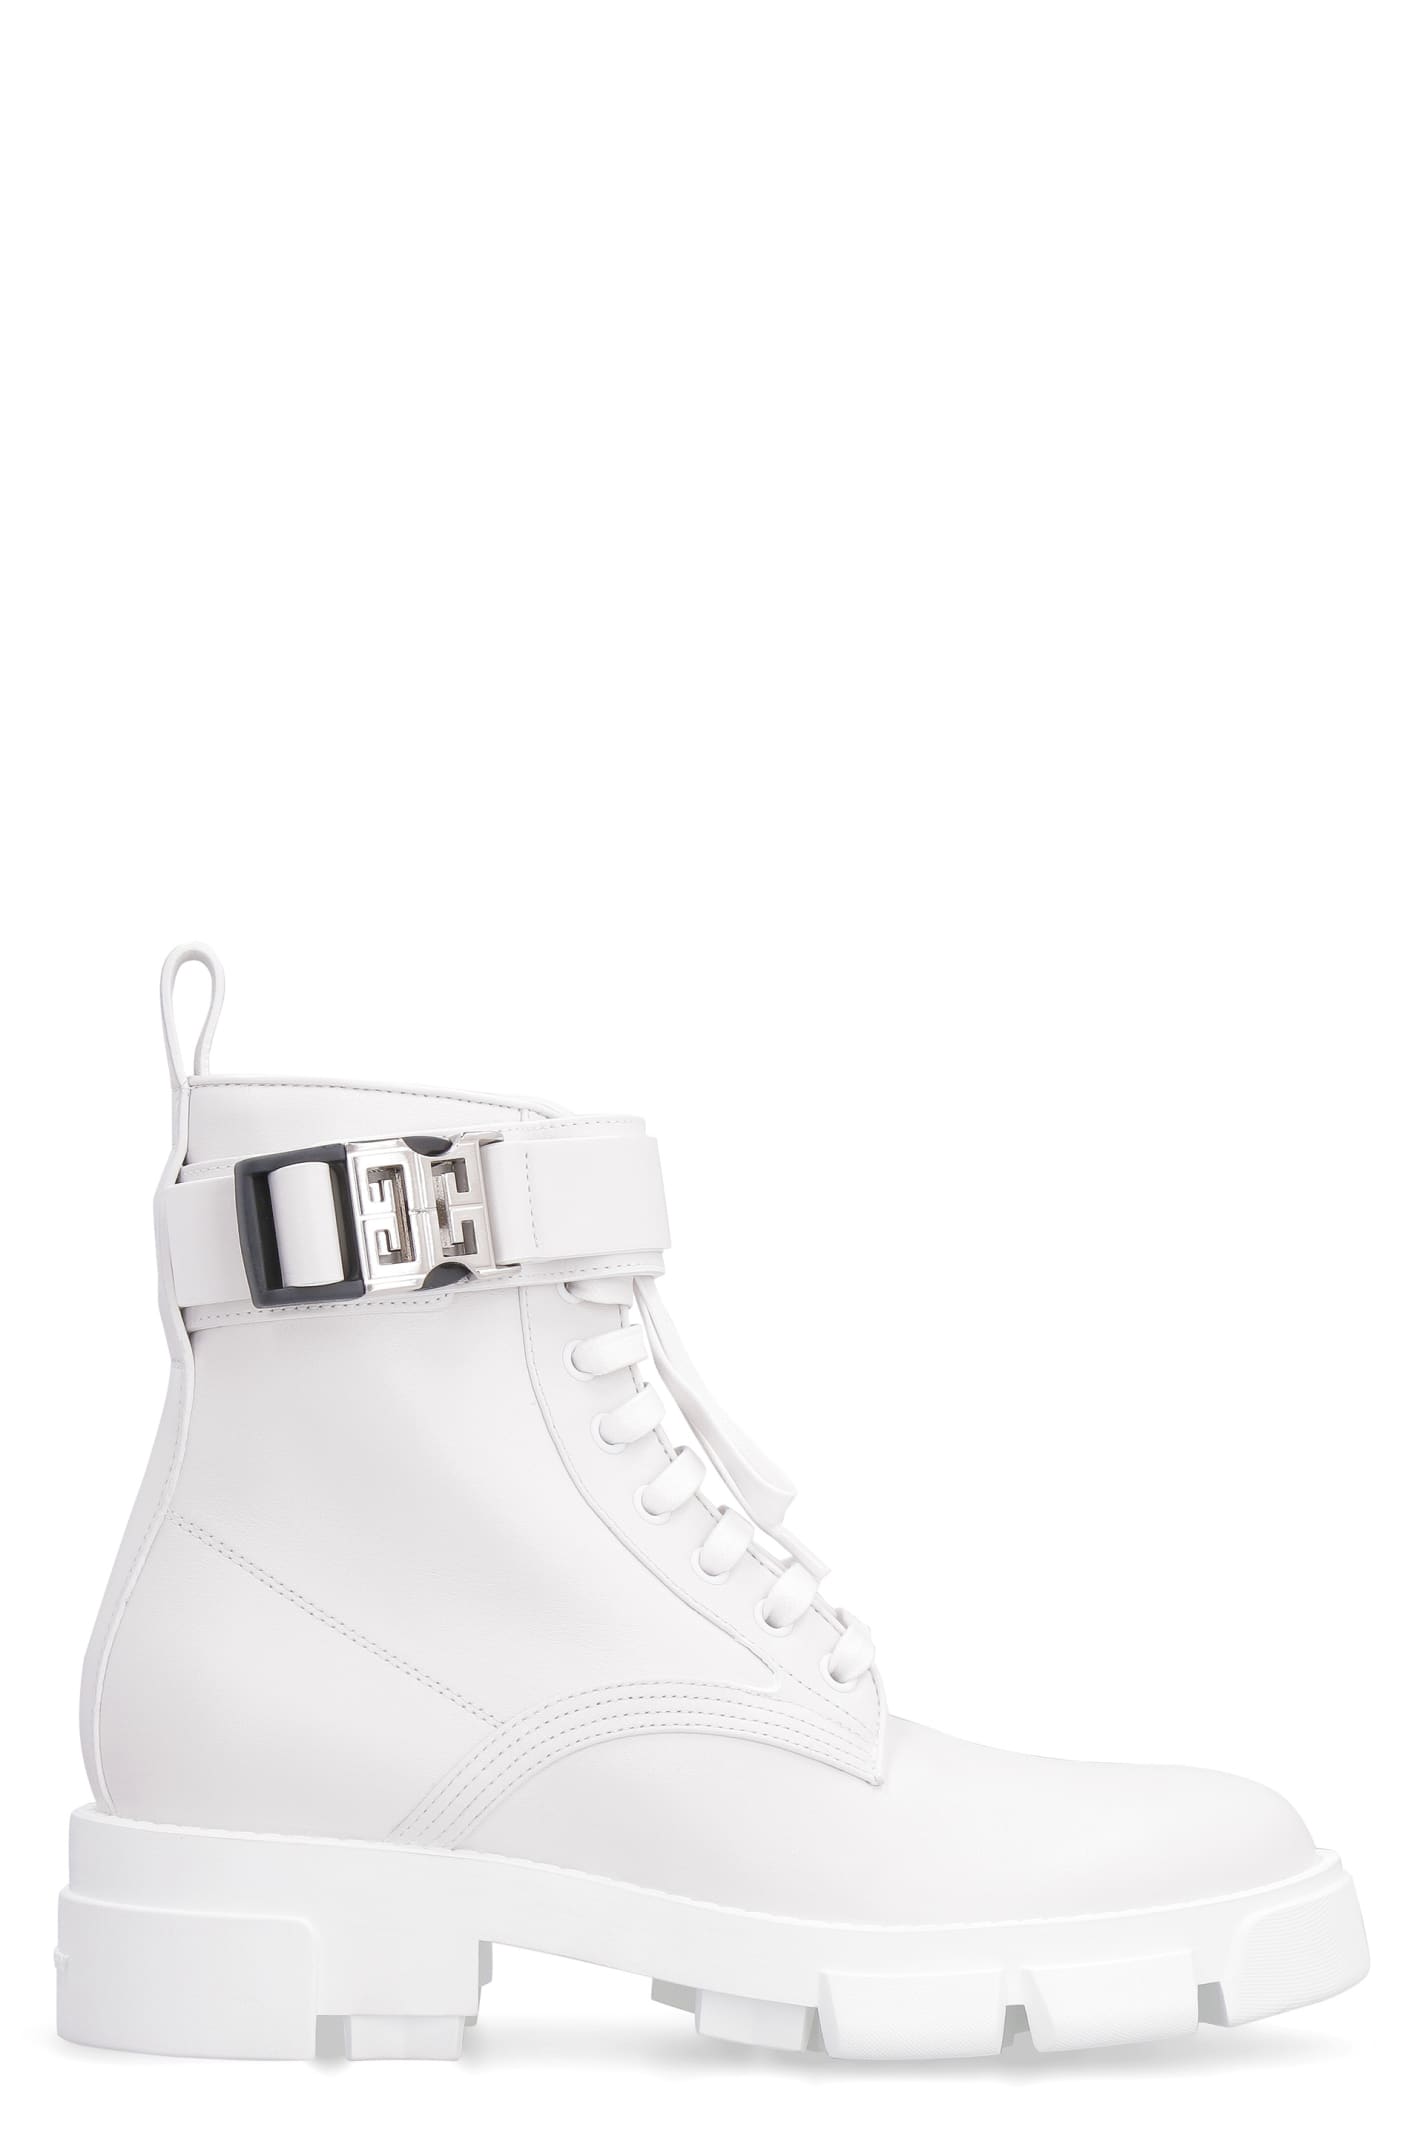 Givenchy Terra Leather Ankle Boots